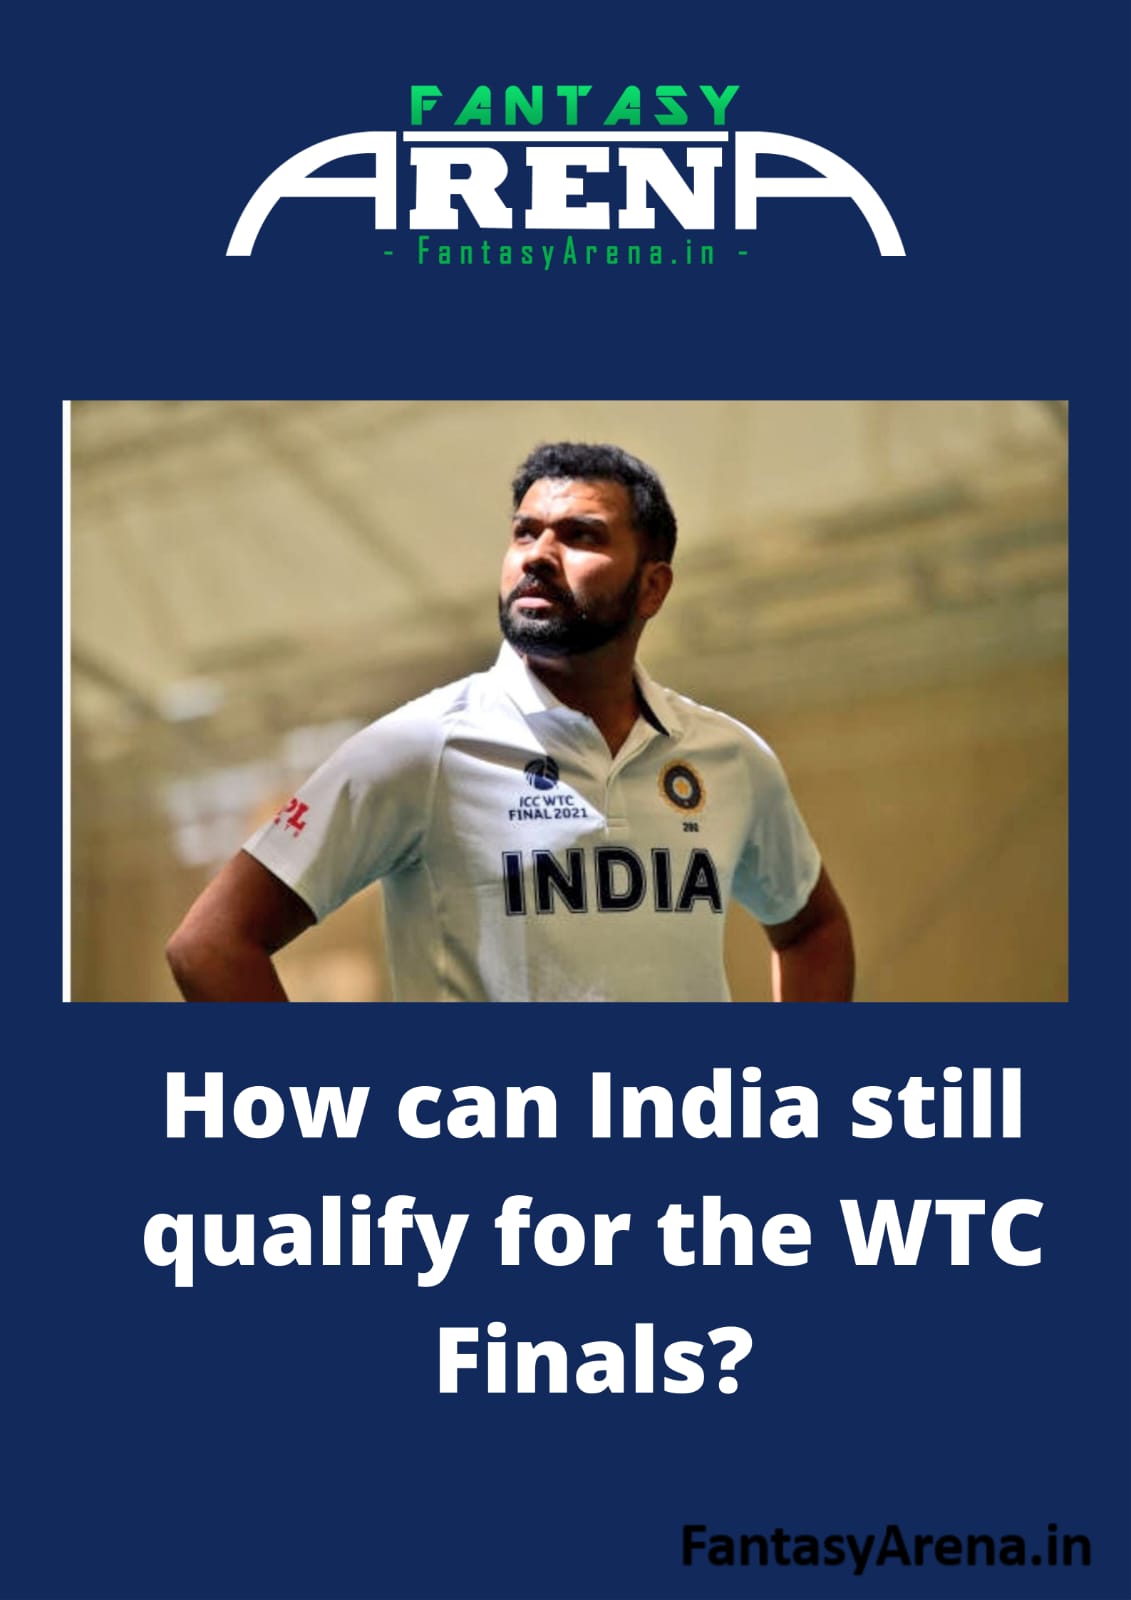 Can India still qualify for the WTC Finals?